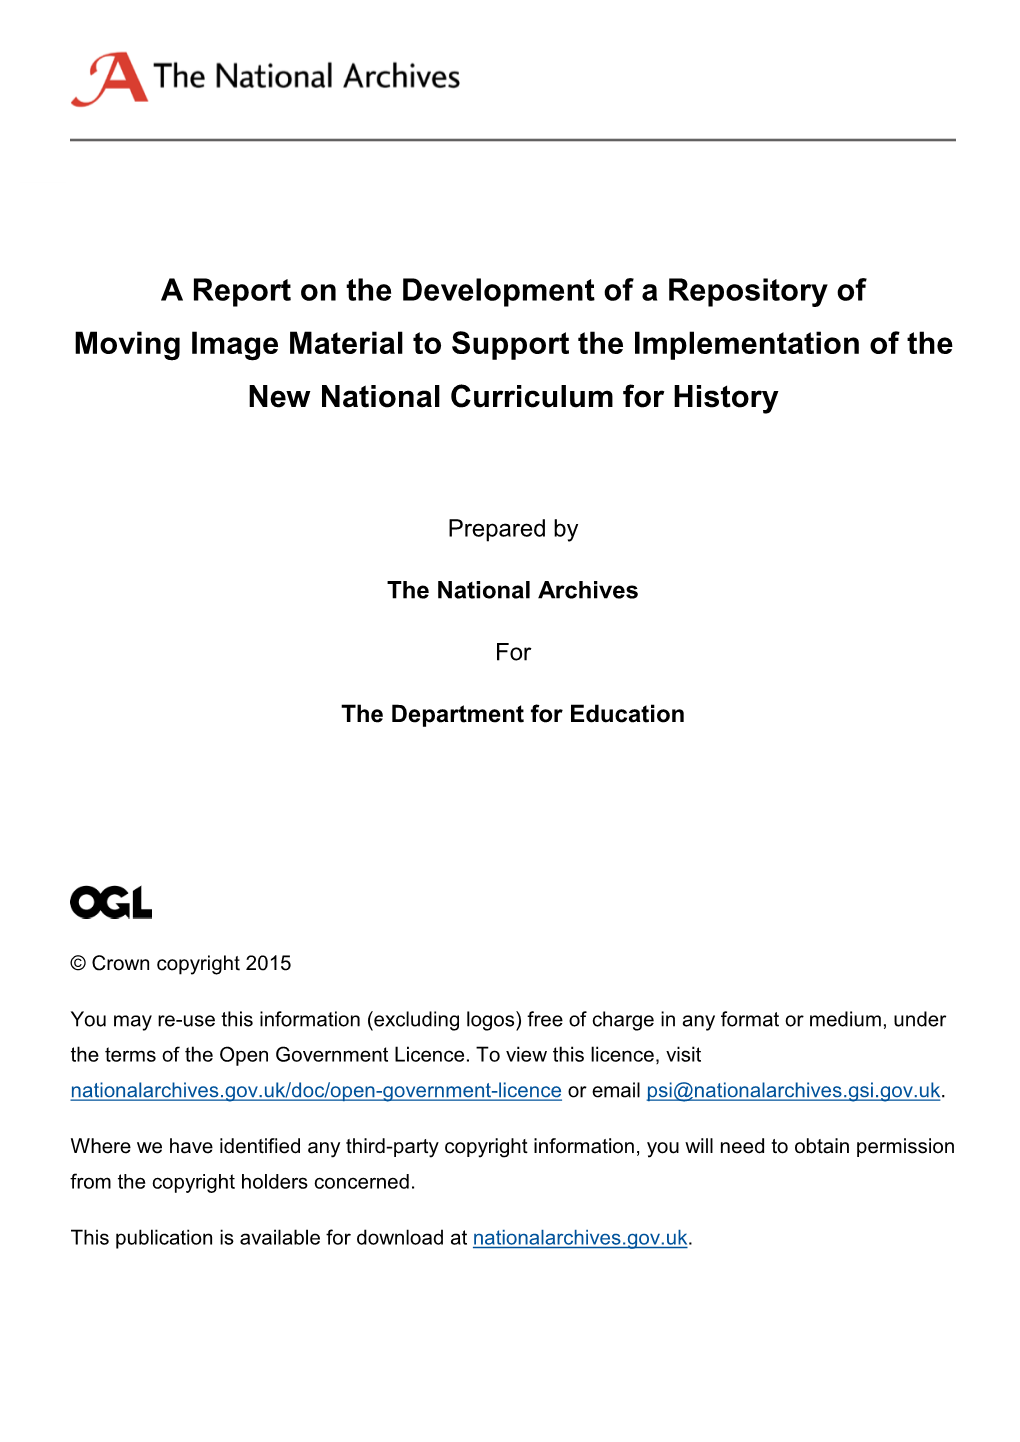 A Report on the Development of a Repository of Moving Image Material to Support the Implementation of the New National Curriculum for History